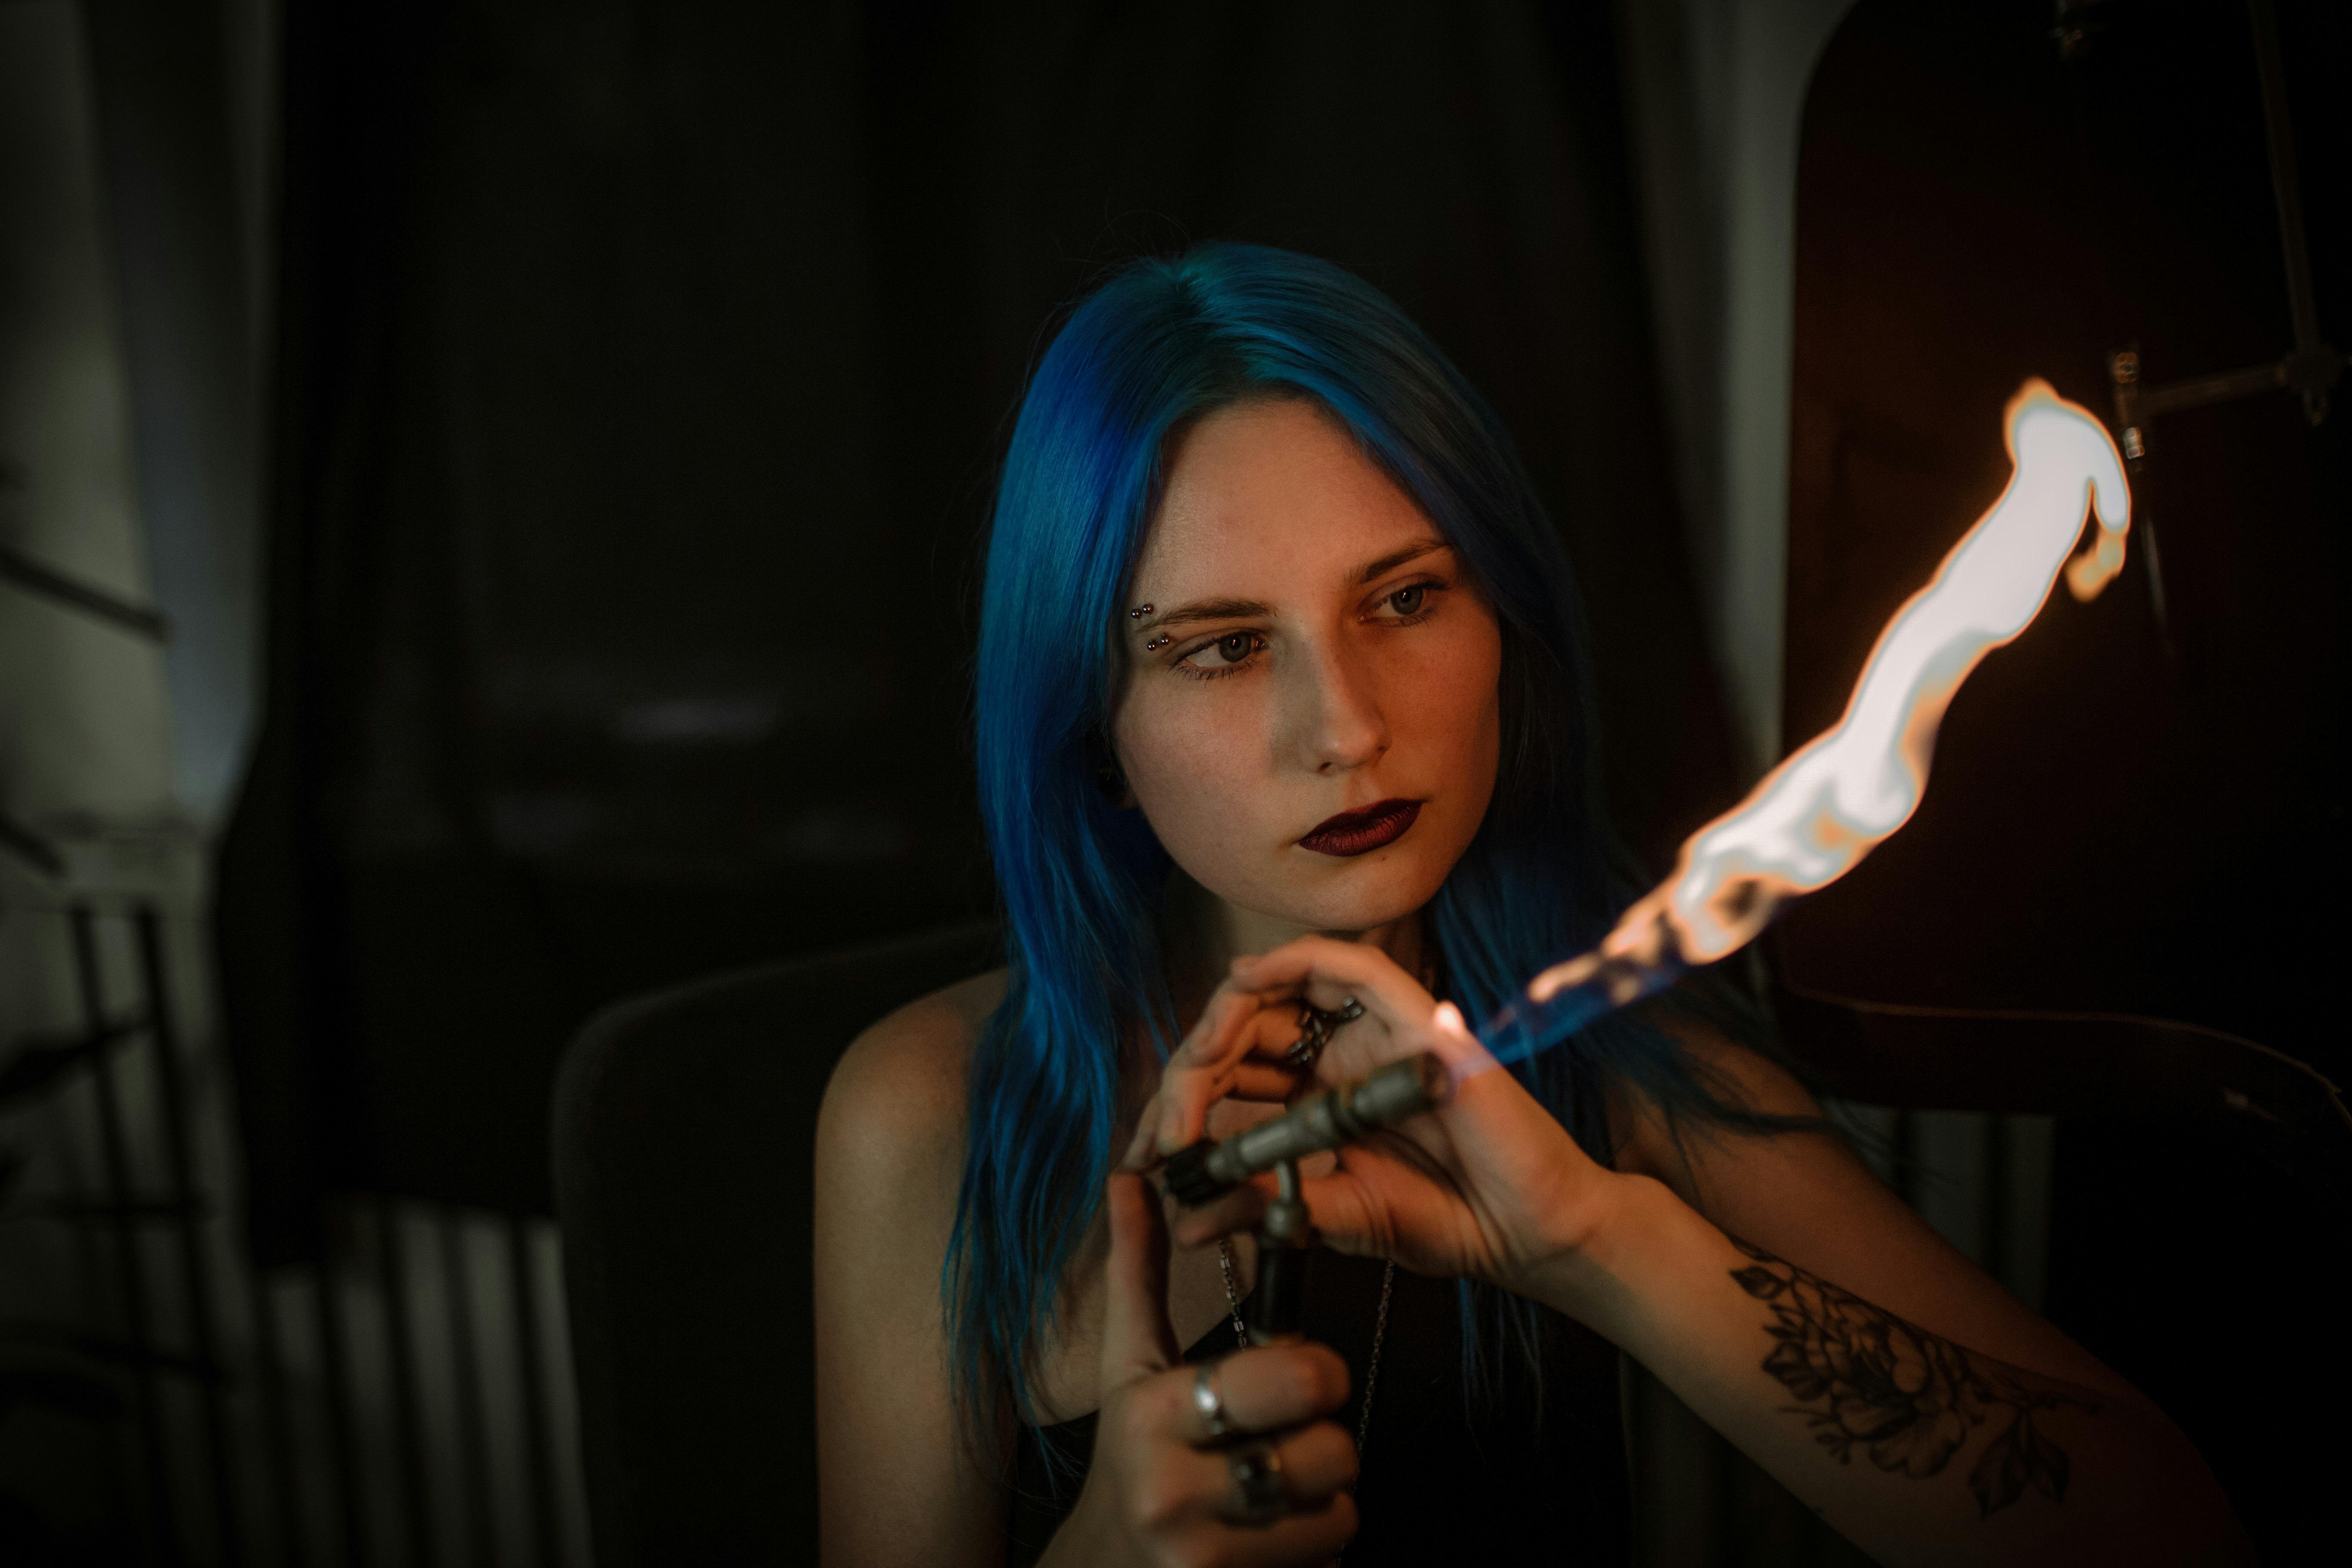 woman with blue hair holding cigarette stick